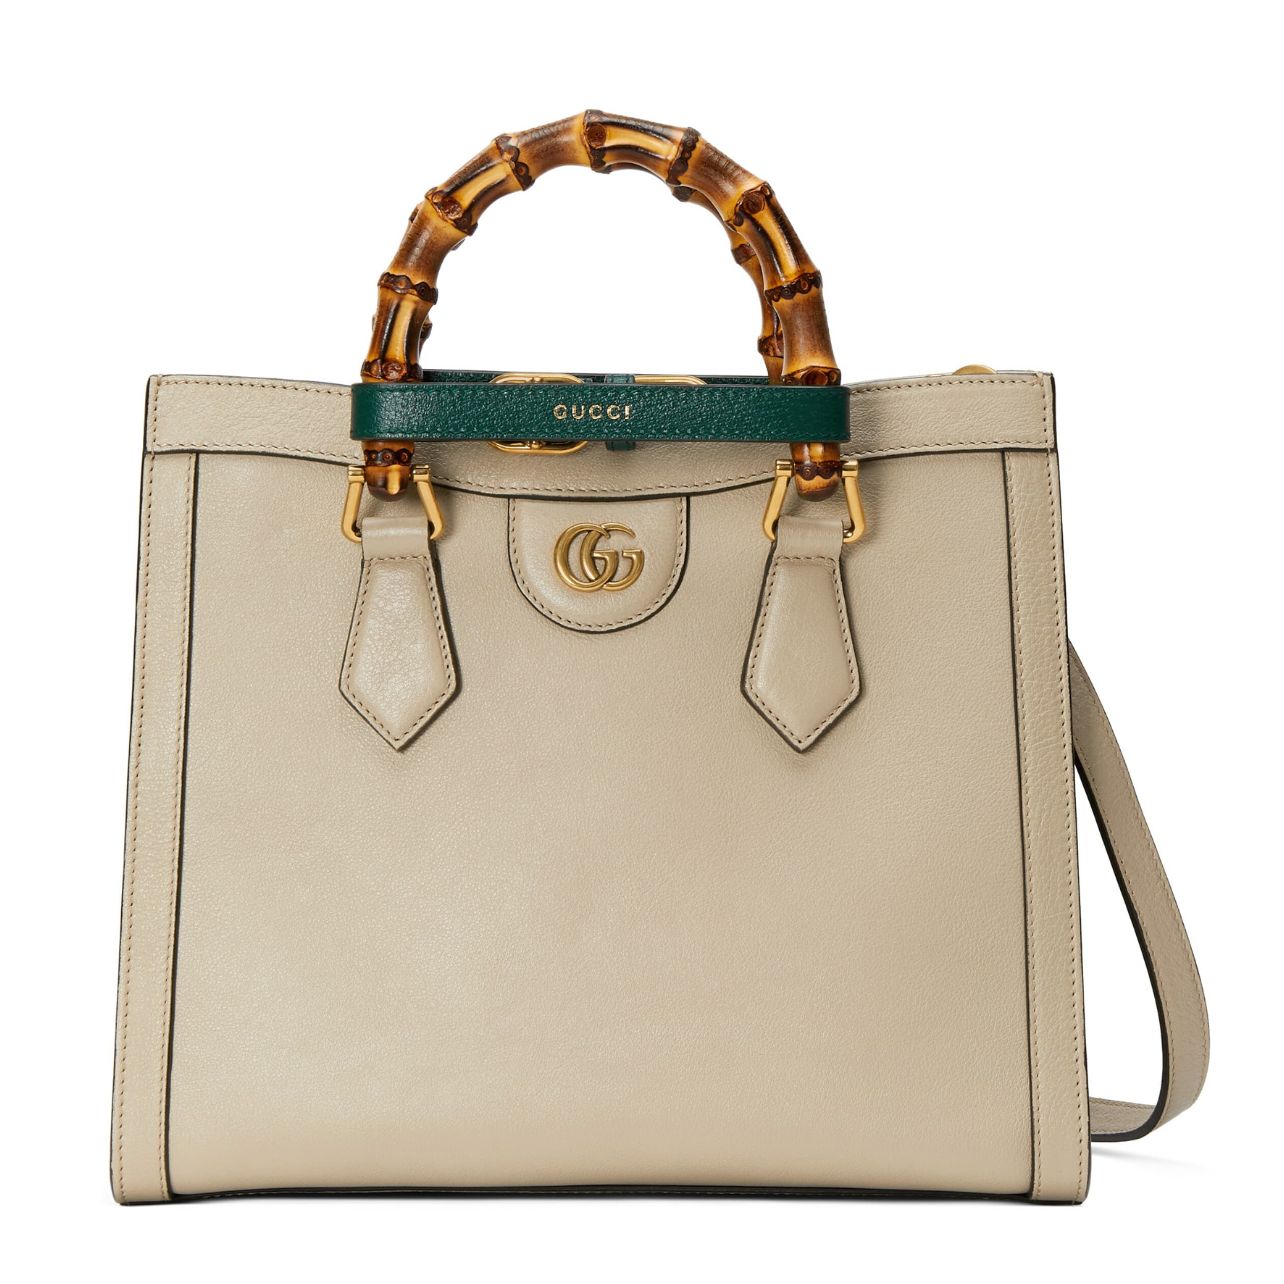 Tan leather tote bag with bamboo handles